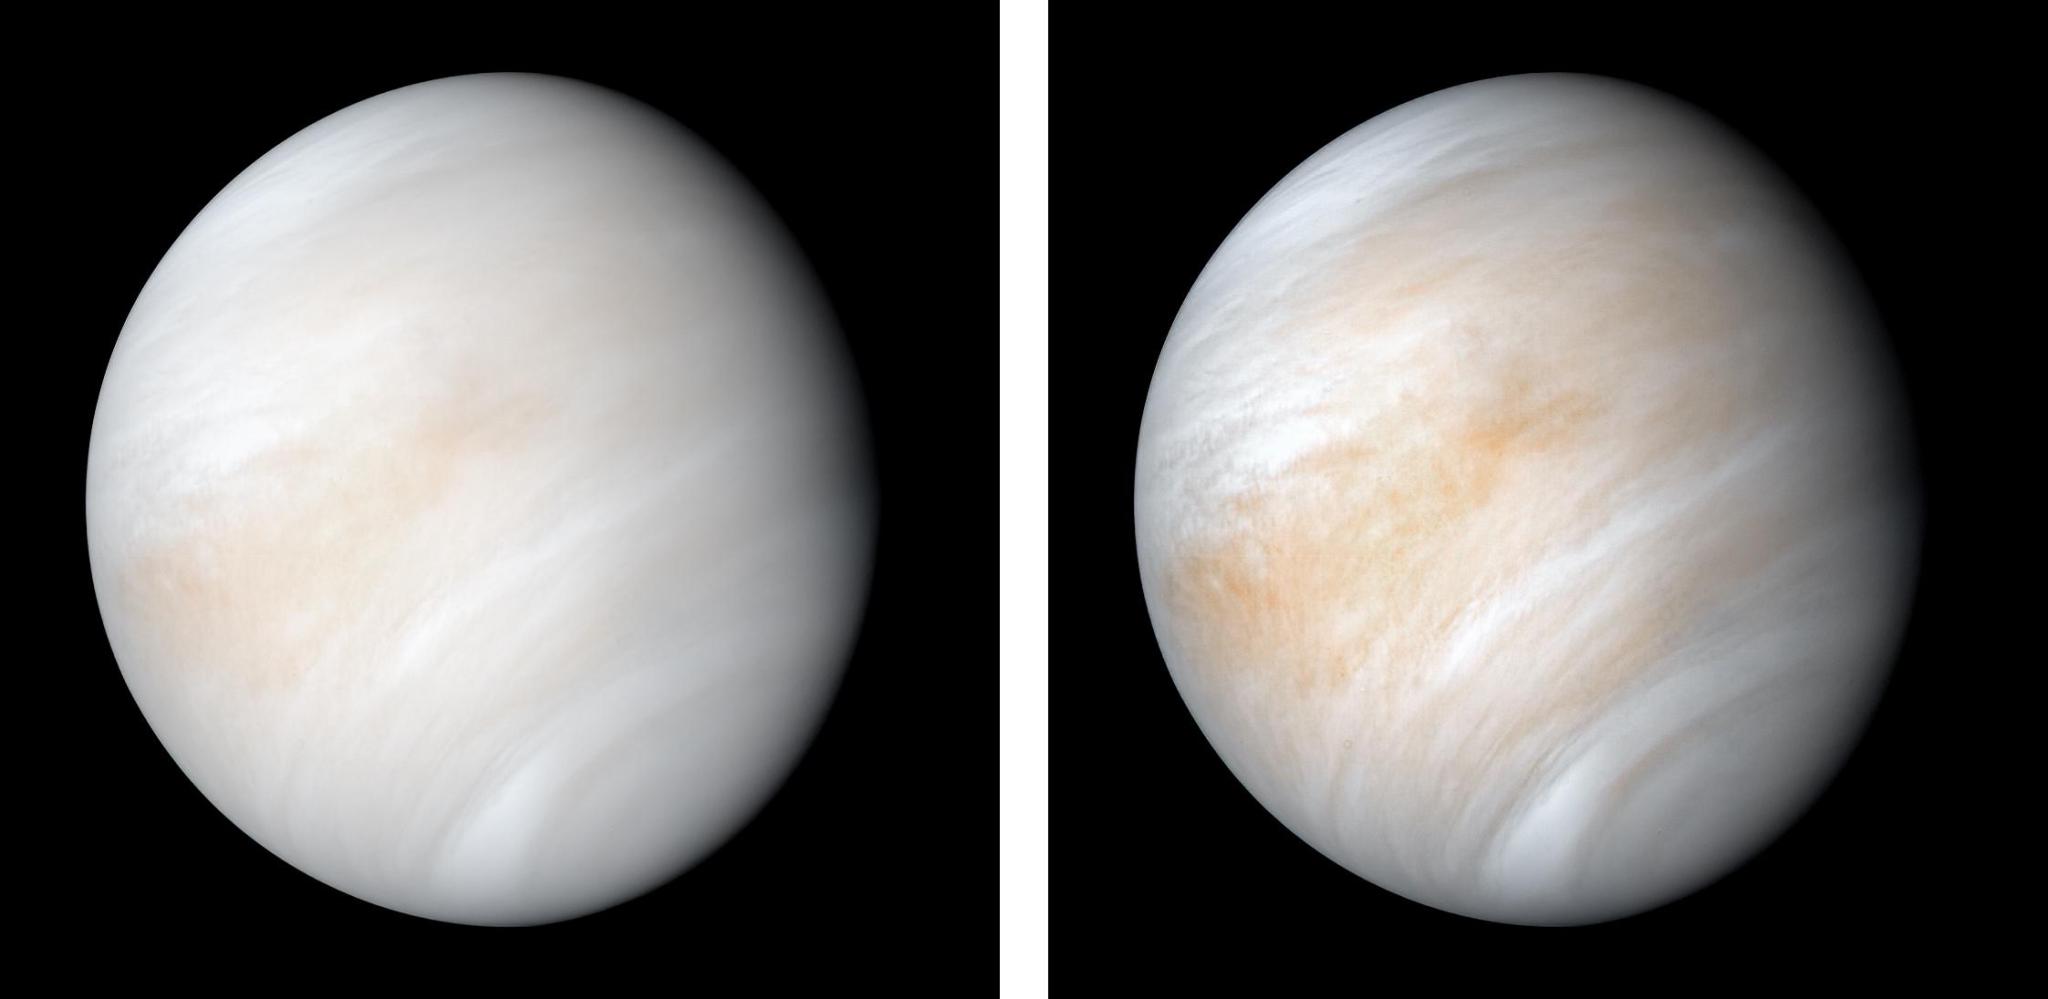 Two views of the planet Venus from the Mariner 10 spacecraft.